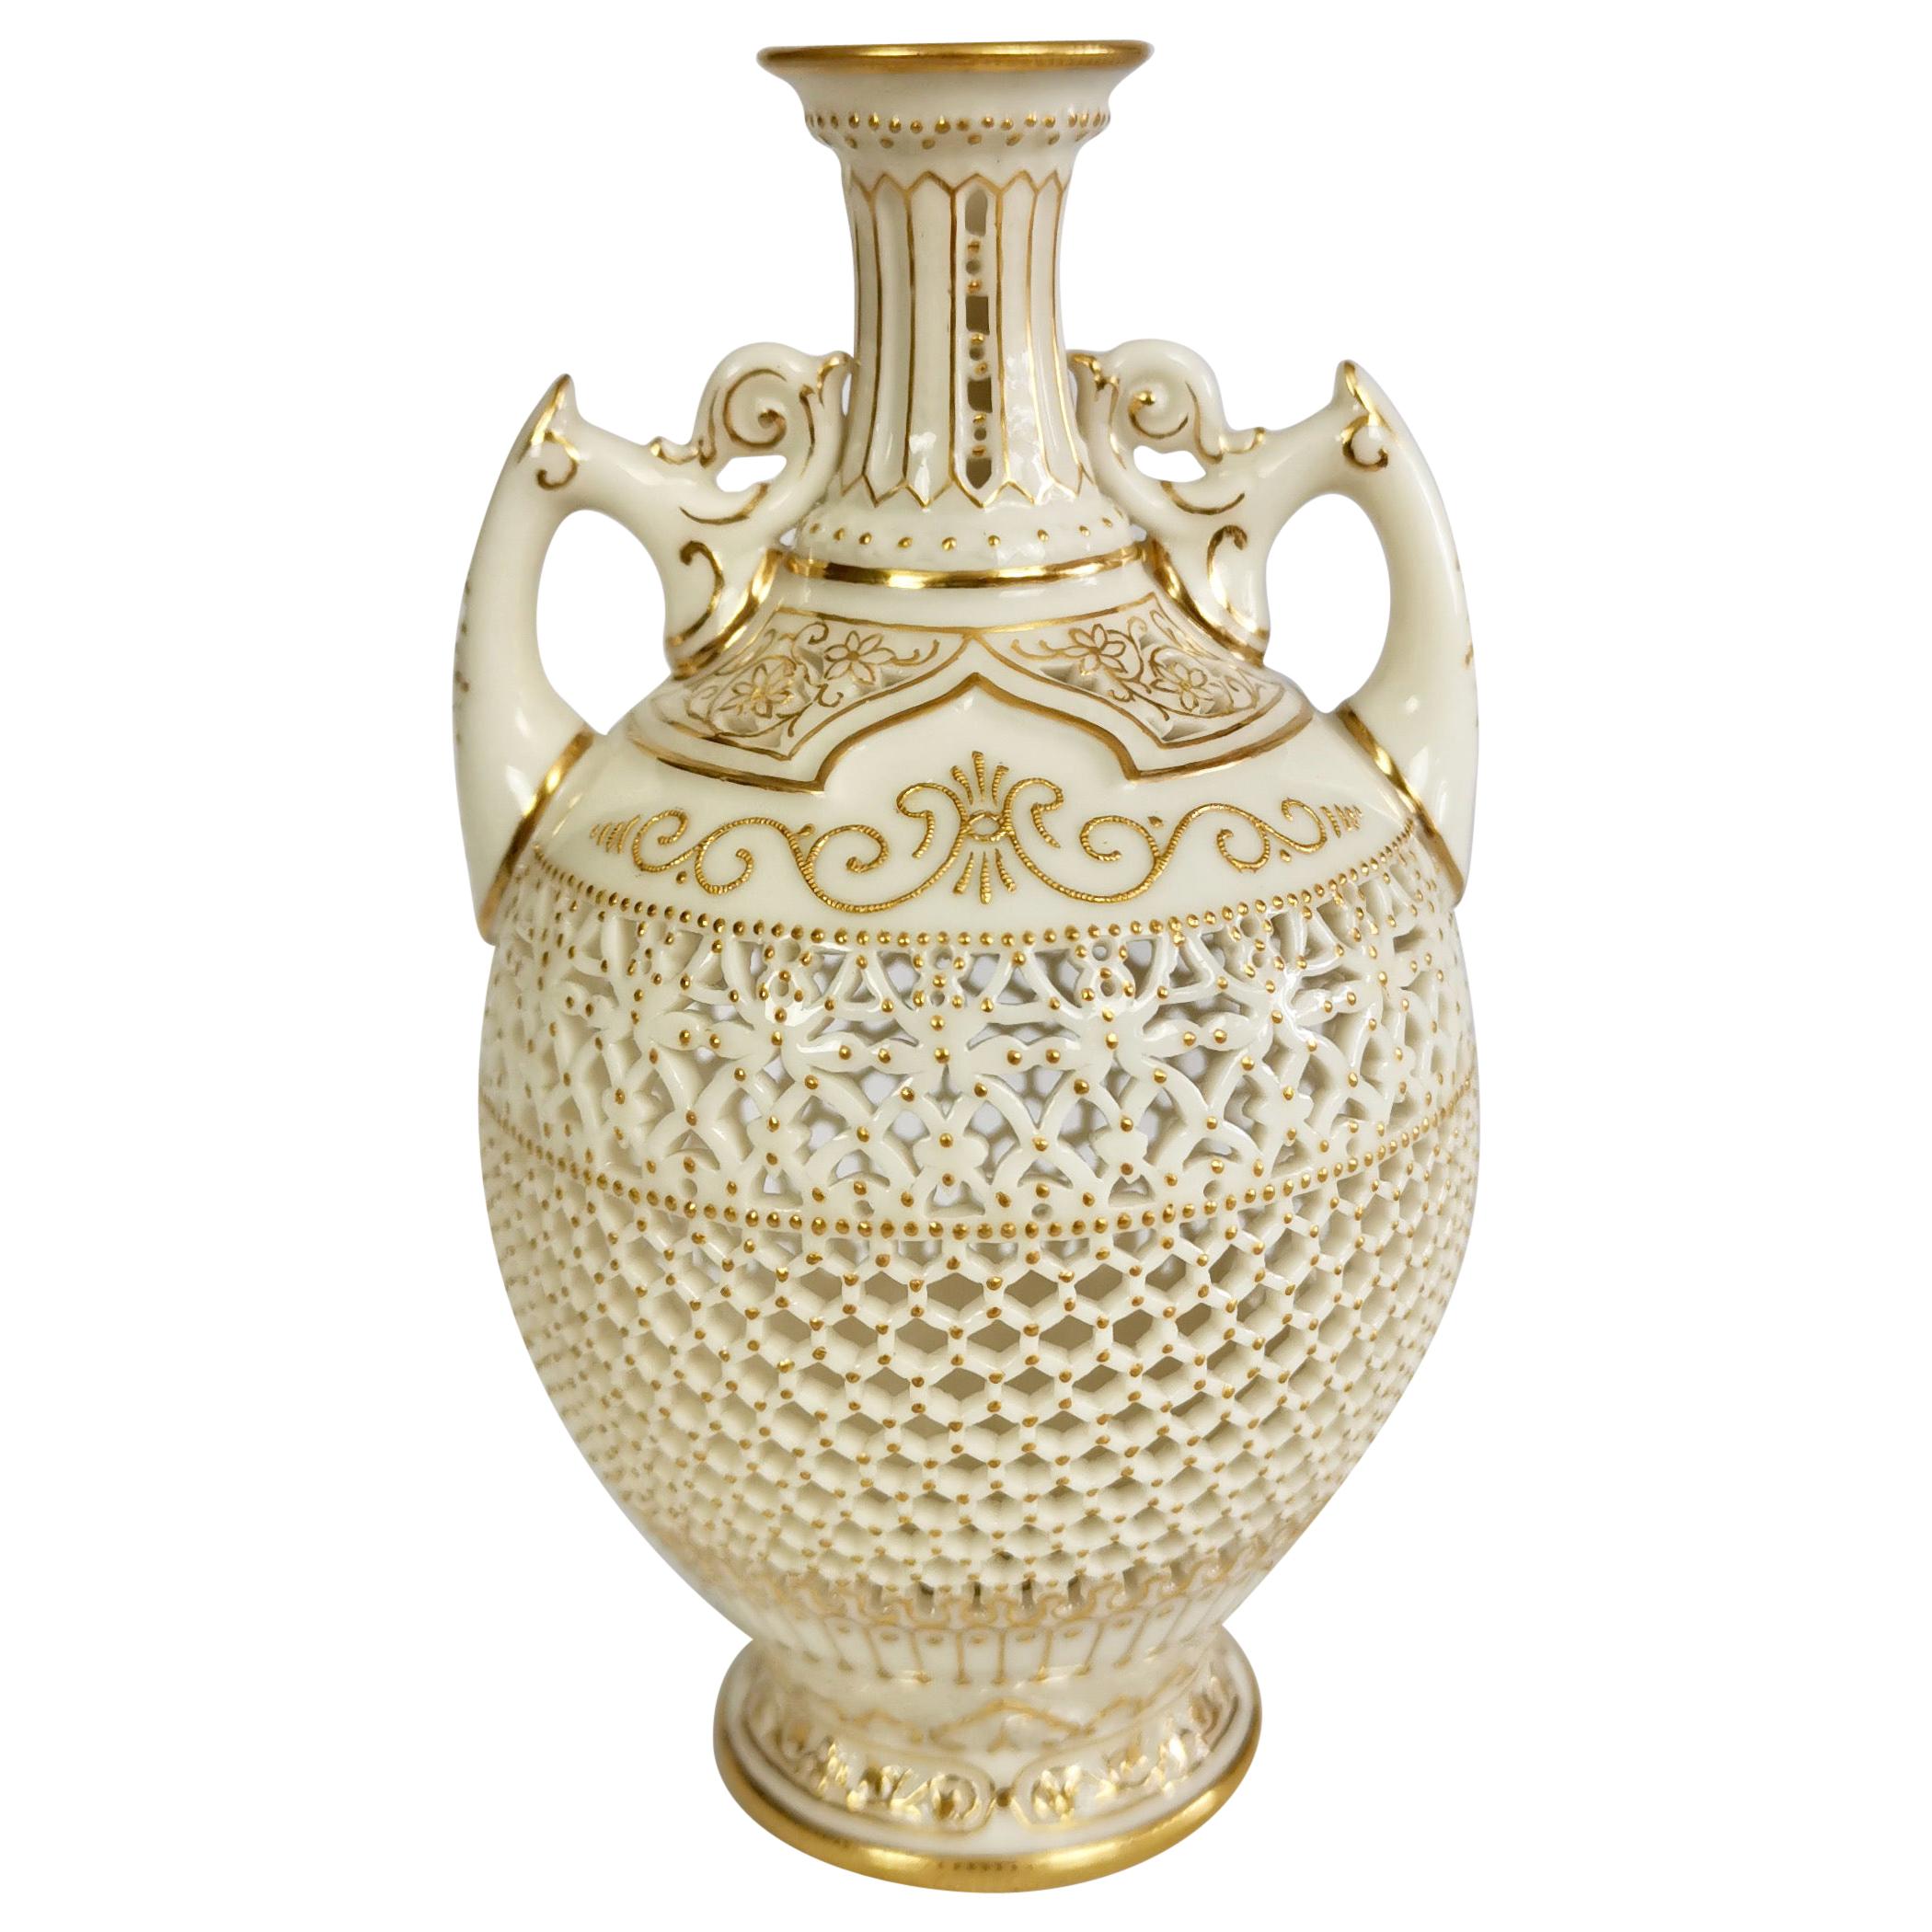 Royal Worcester Small Persian Porcelain Vase, Reticulated George Owen, 1917